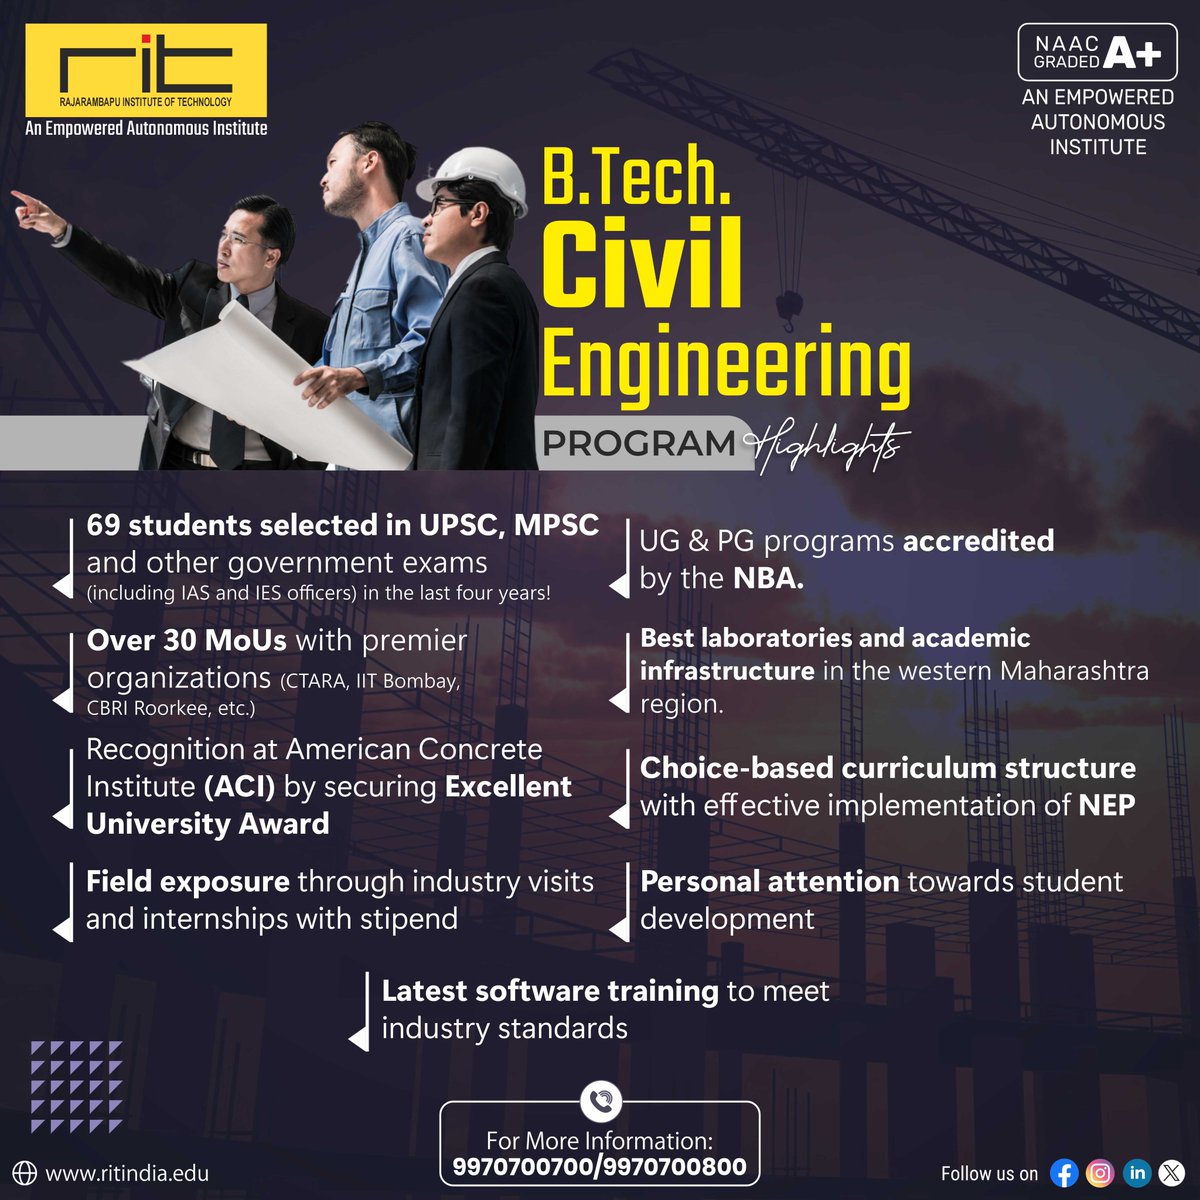 Shape the world around you with our Civil Engineering program! Join us to design and build the infrastructure of tomorrow. Apply now and make a lasting impact! 🏗️🌆
Website: ritindia.edu

#EngineeringAdmissions #CivilEngineering #FutureBuilders